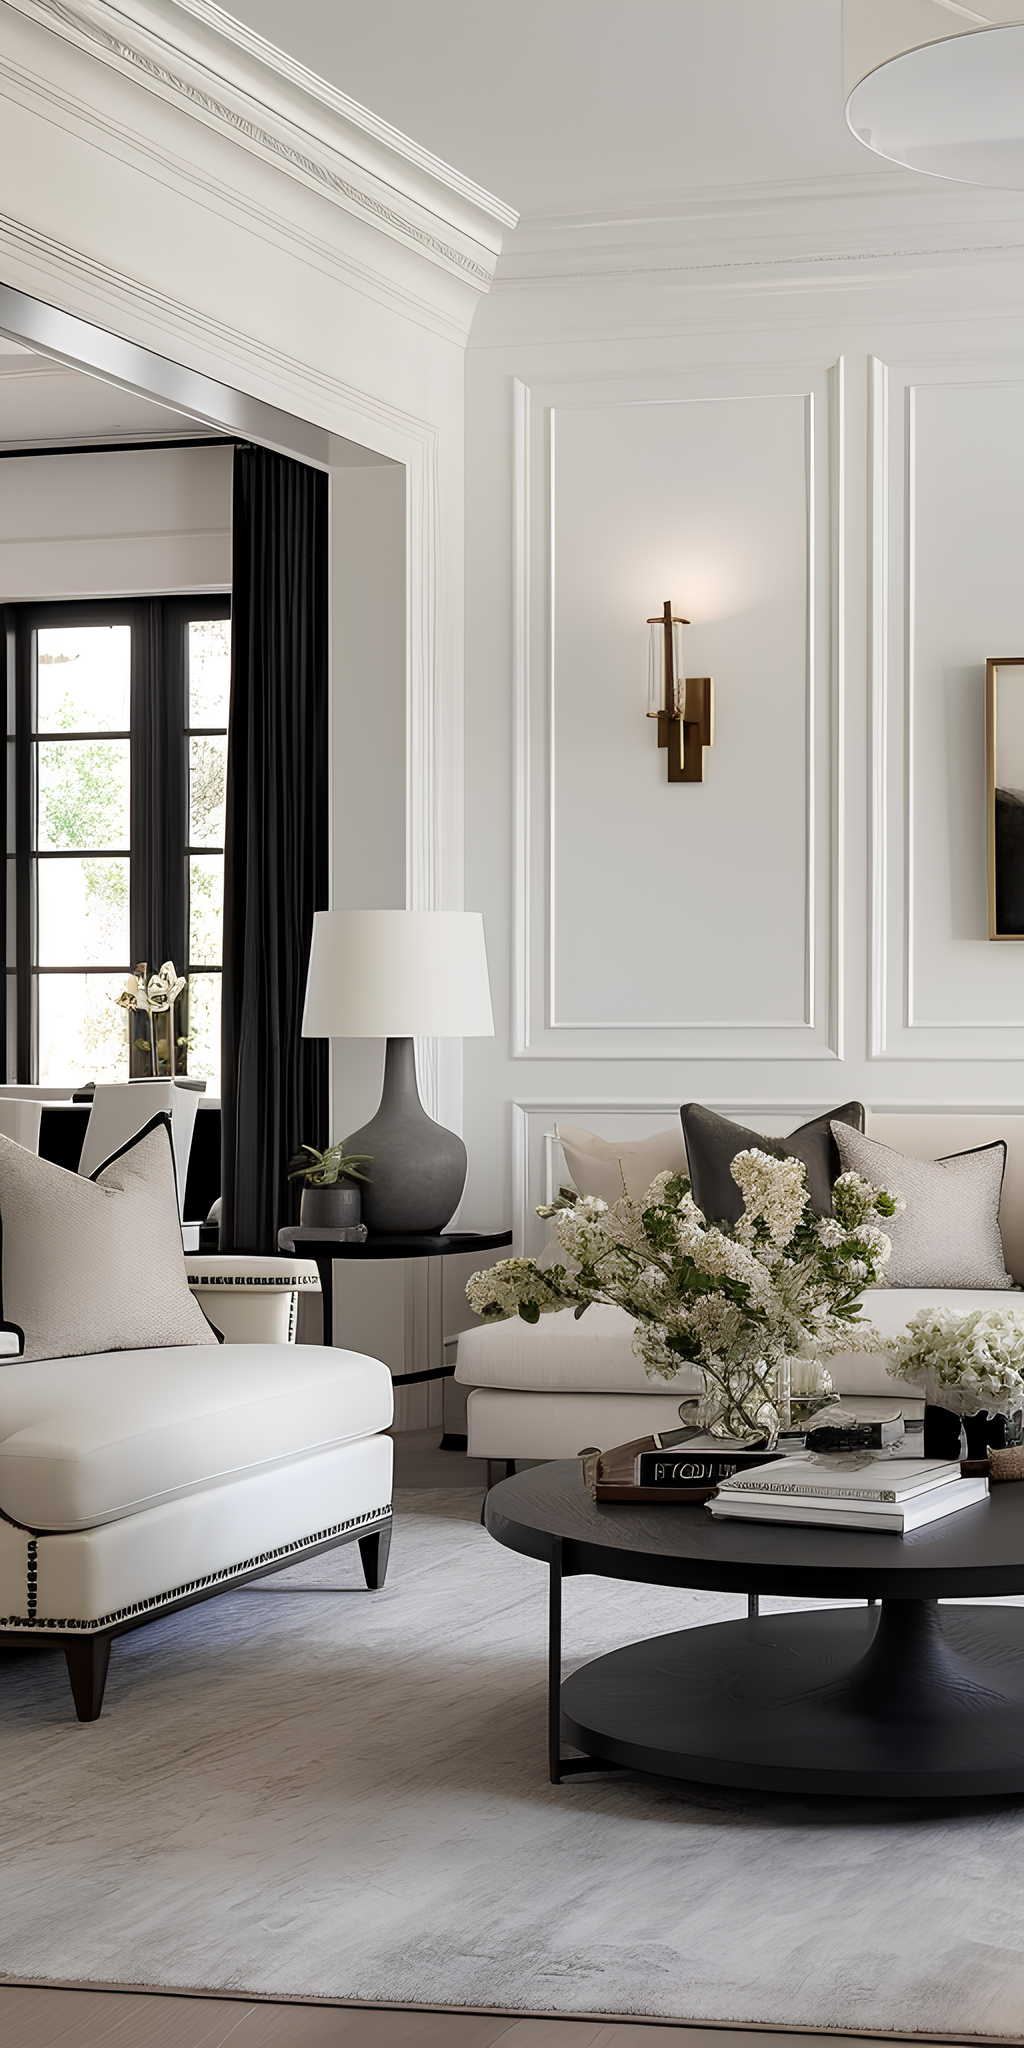 How to Achieve a Sleek and Sophisticated
Contemporary Living Room